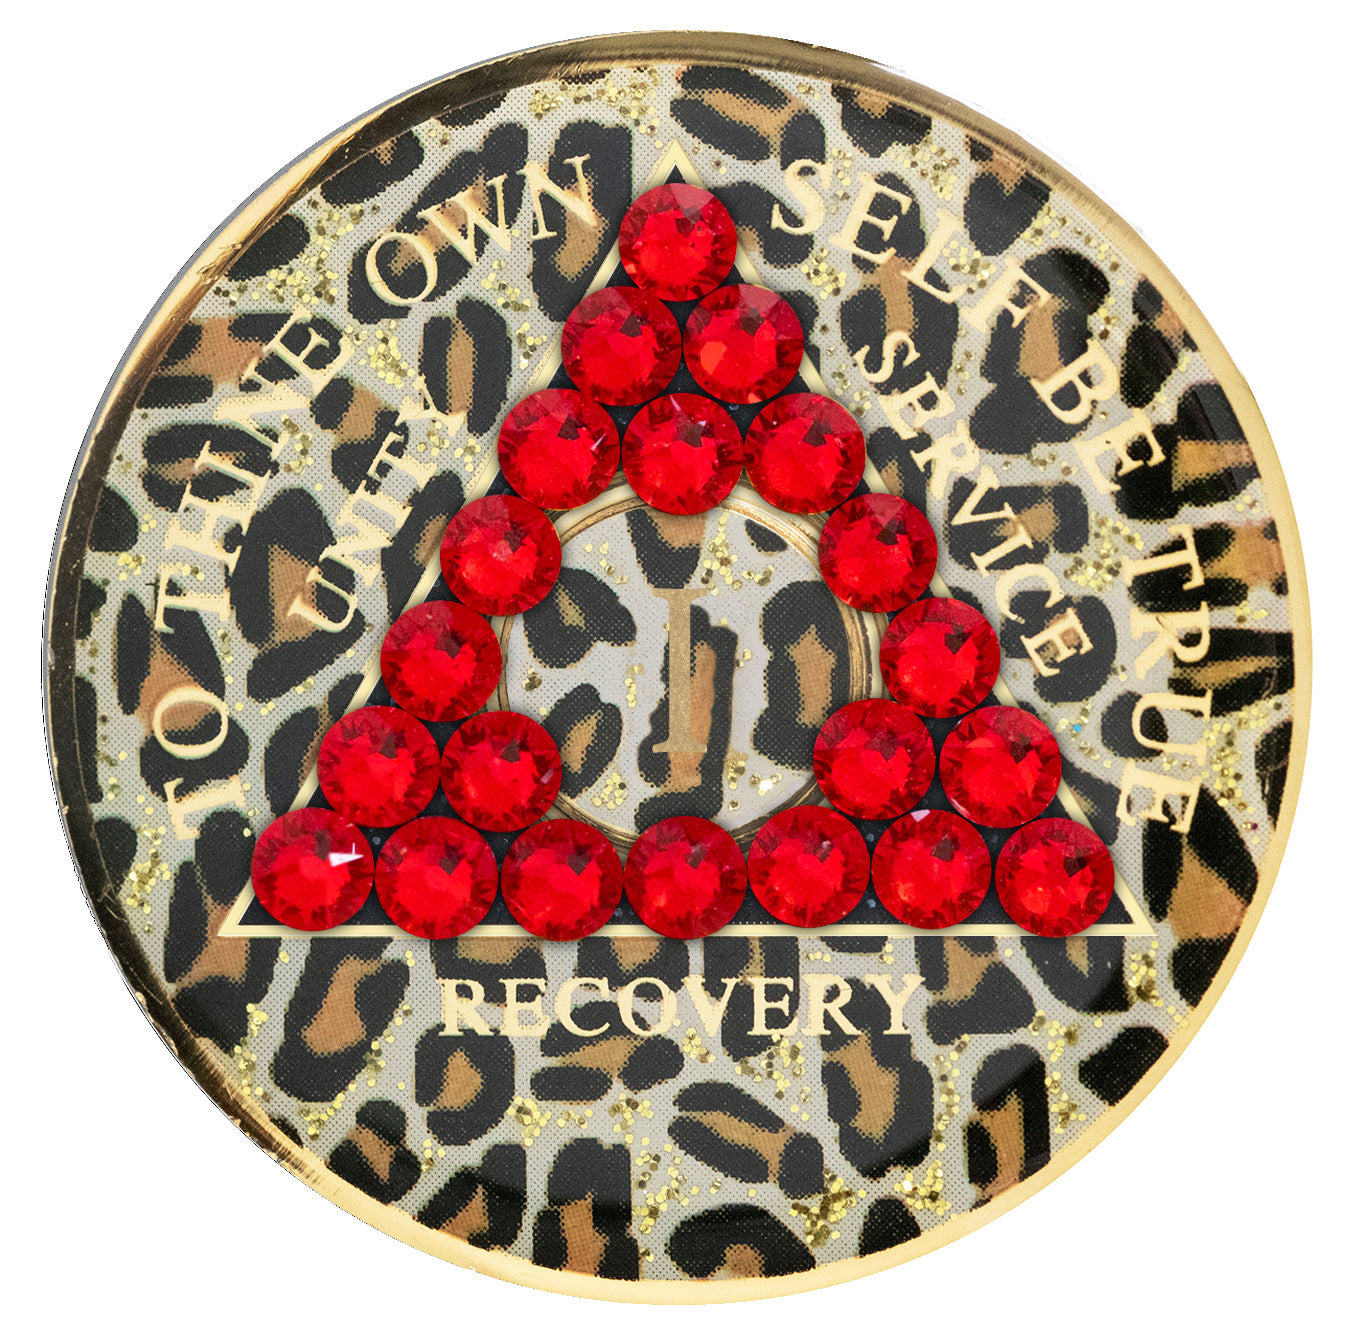 1 year AA medallion Leopard glitter print with 21 red genuine crystals in the shape of the triangle, with to thine own self be true, unity, service, recovery, and the roman numeral in light gold foil, let your recovery shine, not your time, the medallion is sealed with resin for a shiny finish that will last and is scratch proof.